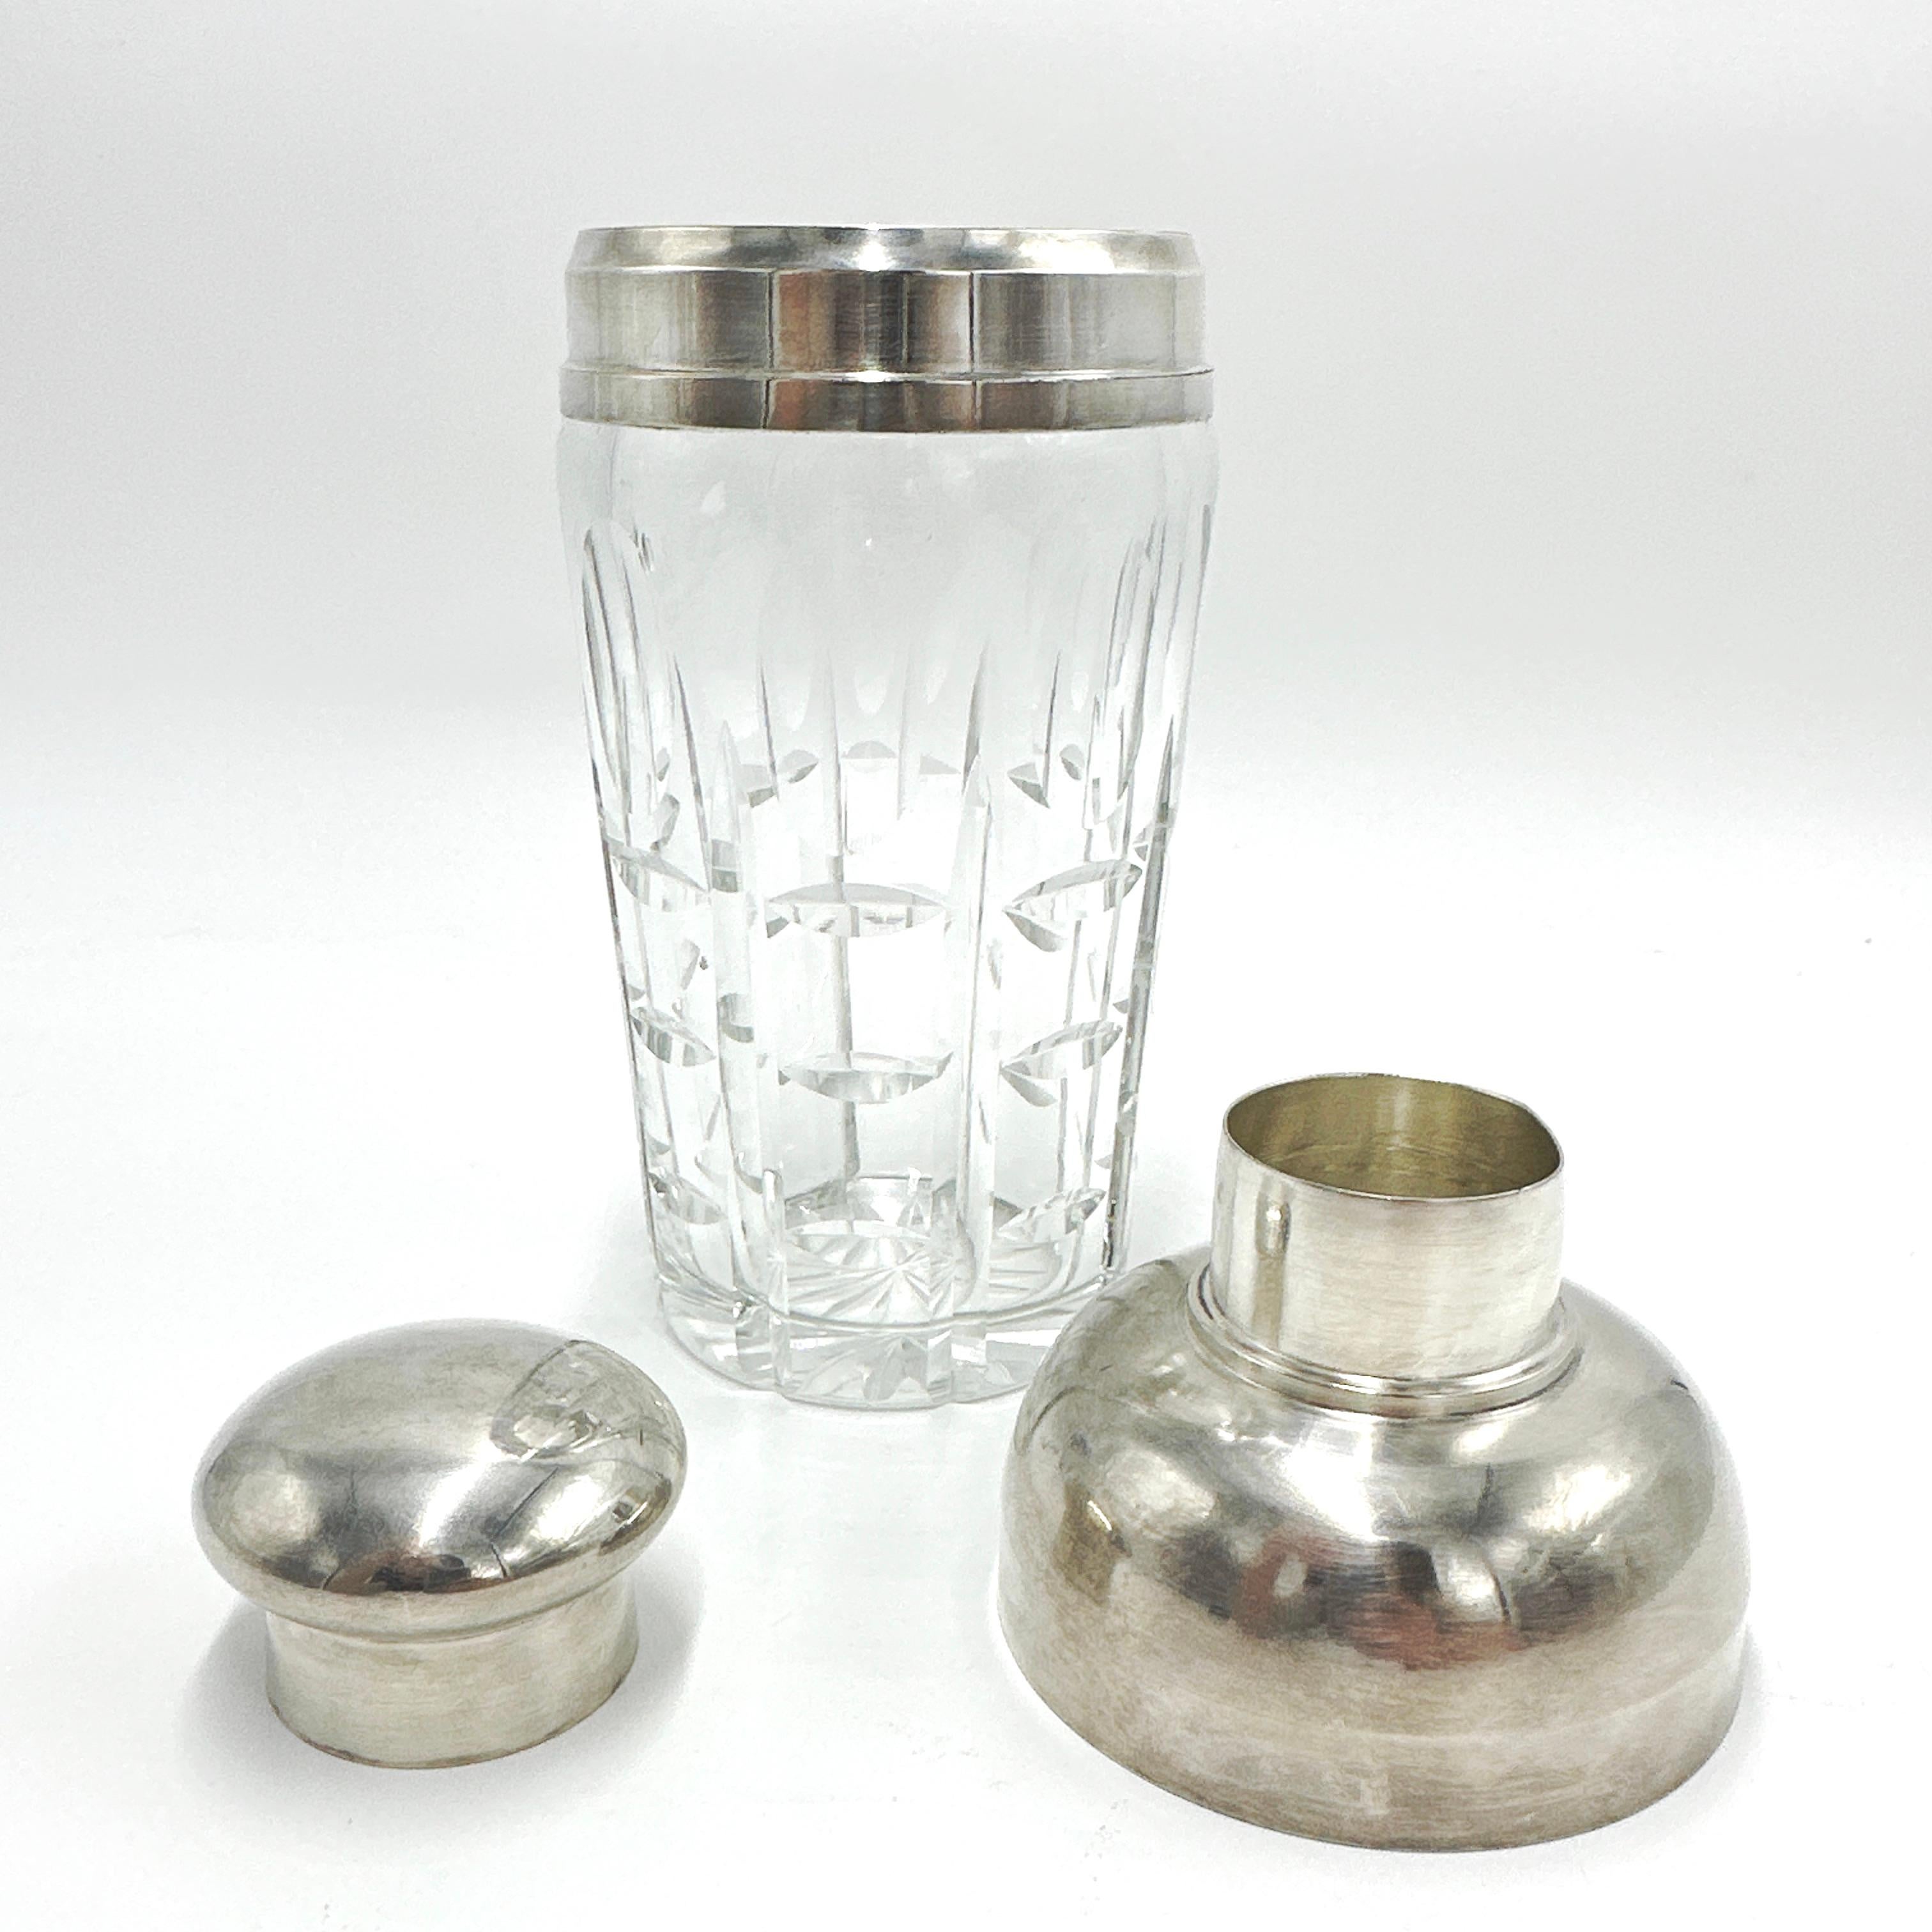 French Art Deco Chrome and Crystal Martini Shaker 1